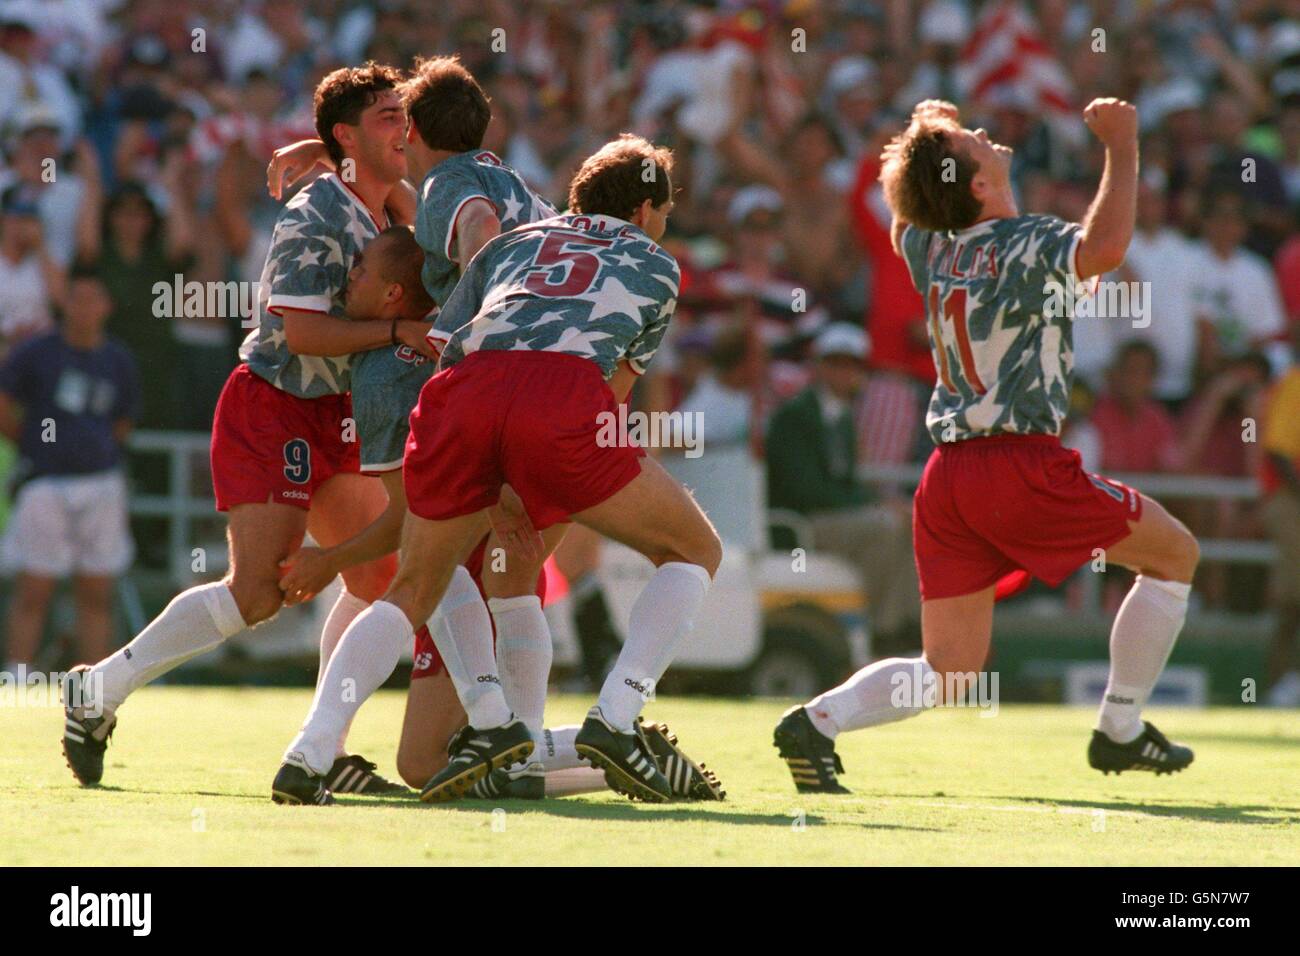 Soccer - World Cup USA 94 - Group A - USA v Colombia. USA players celebrate with Earnie Stewart (on his knees) after Stewart scores USA's 2nd goal Stock Photo